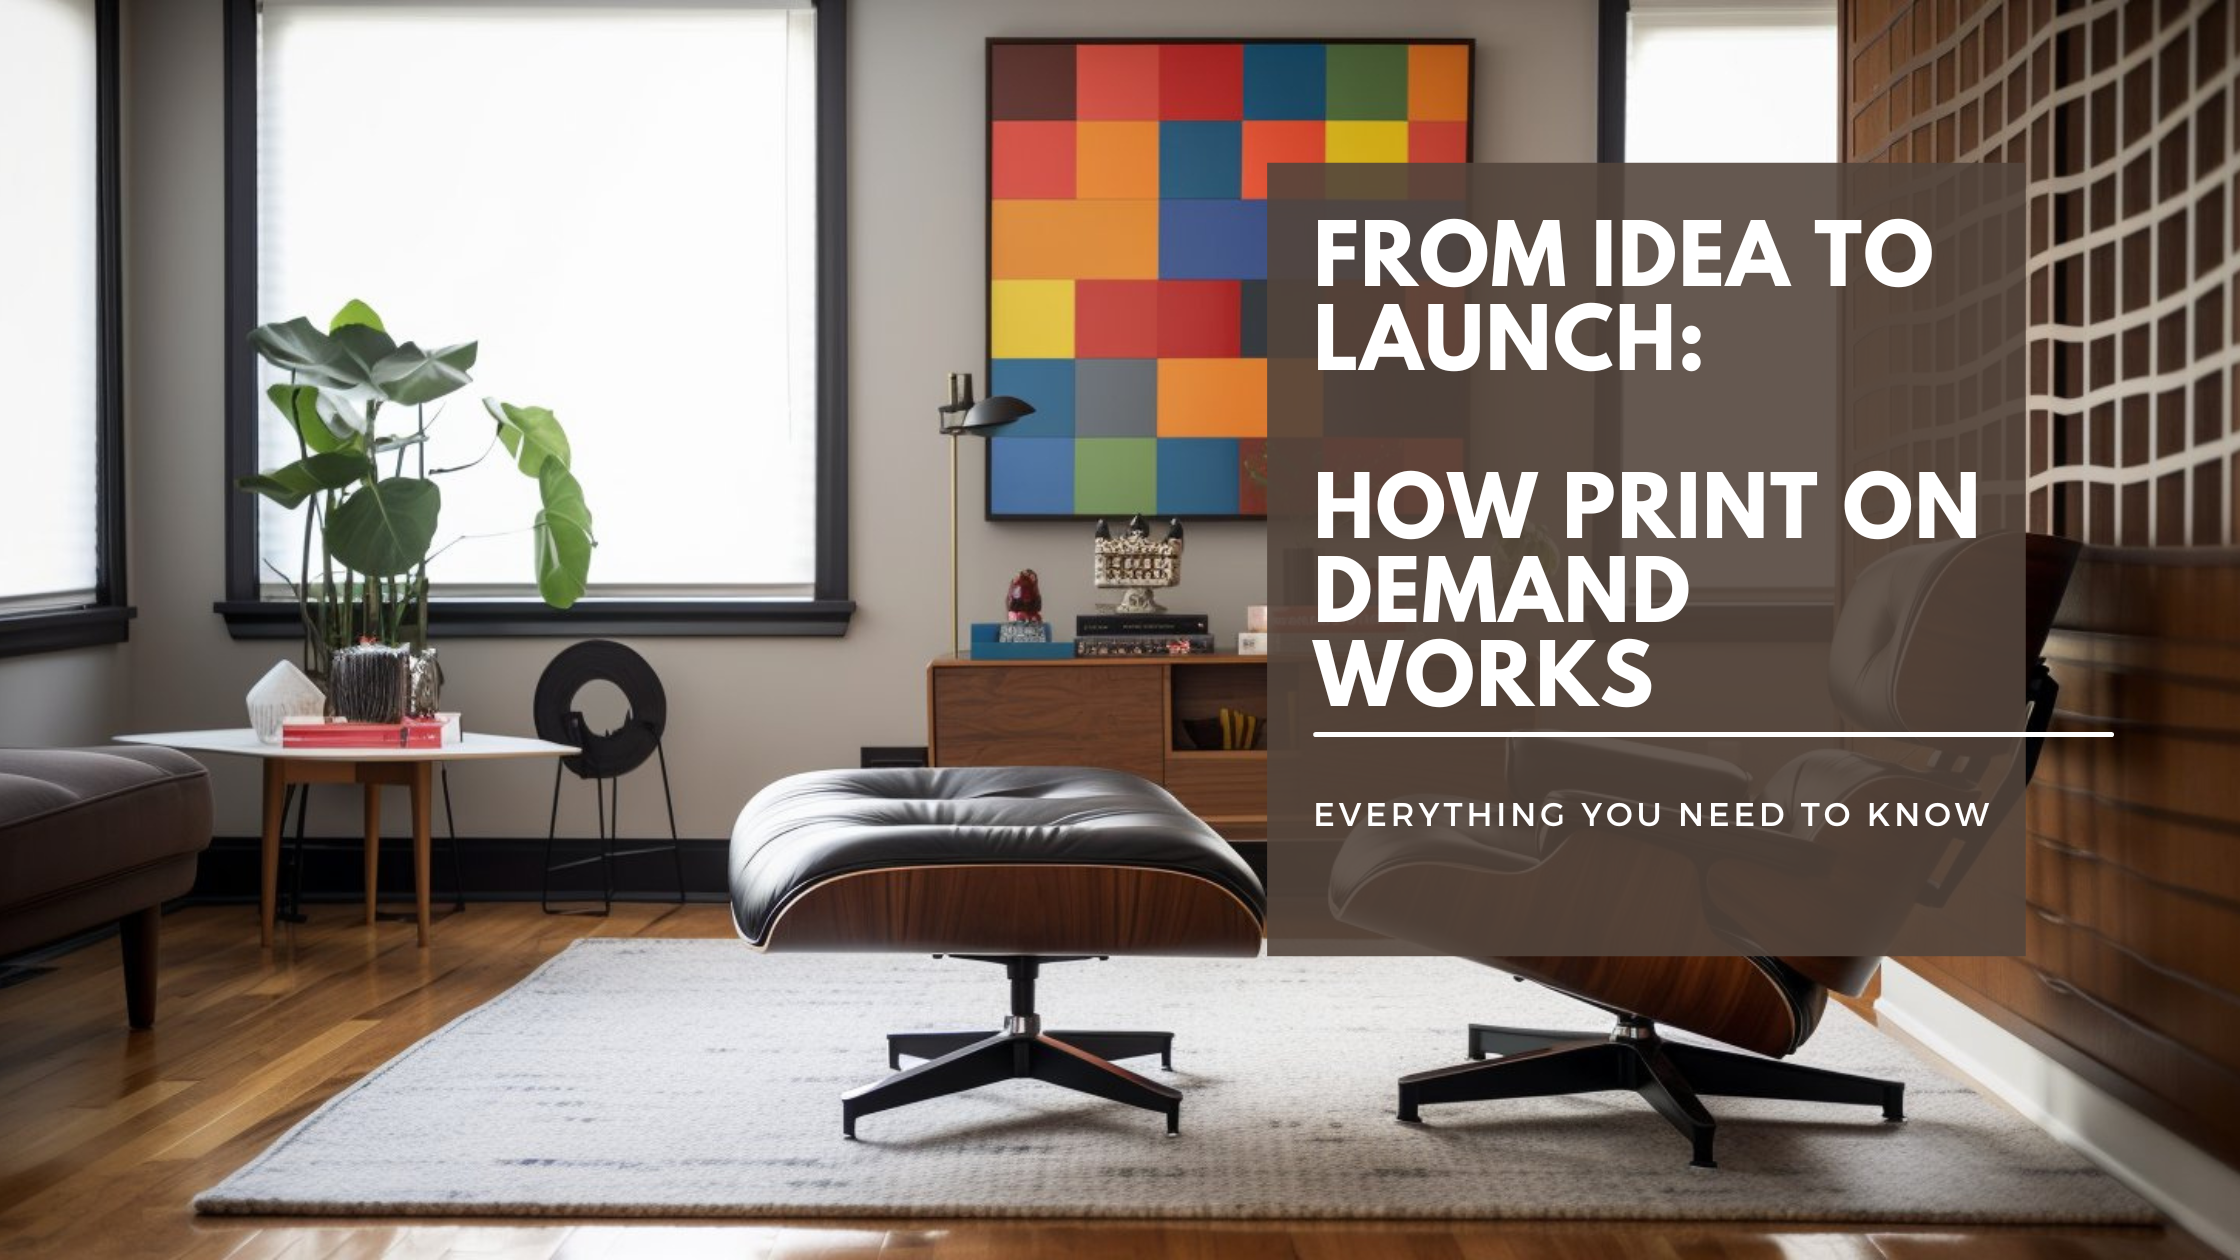 From Idea to Product: How Print on Demand Works